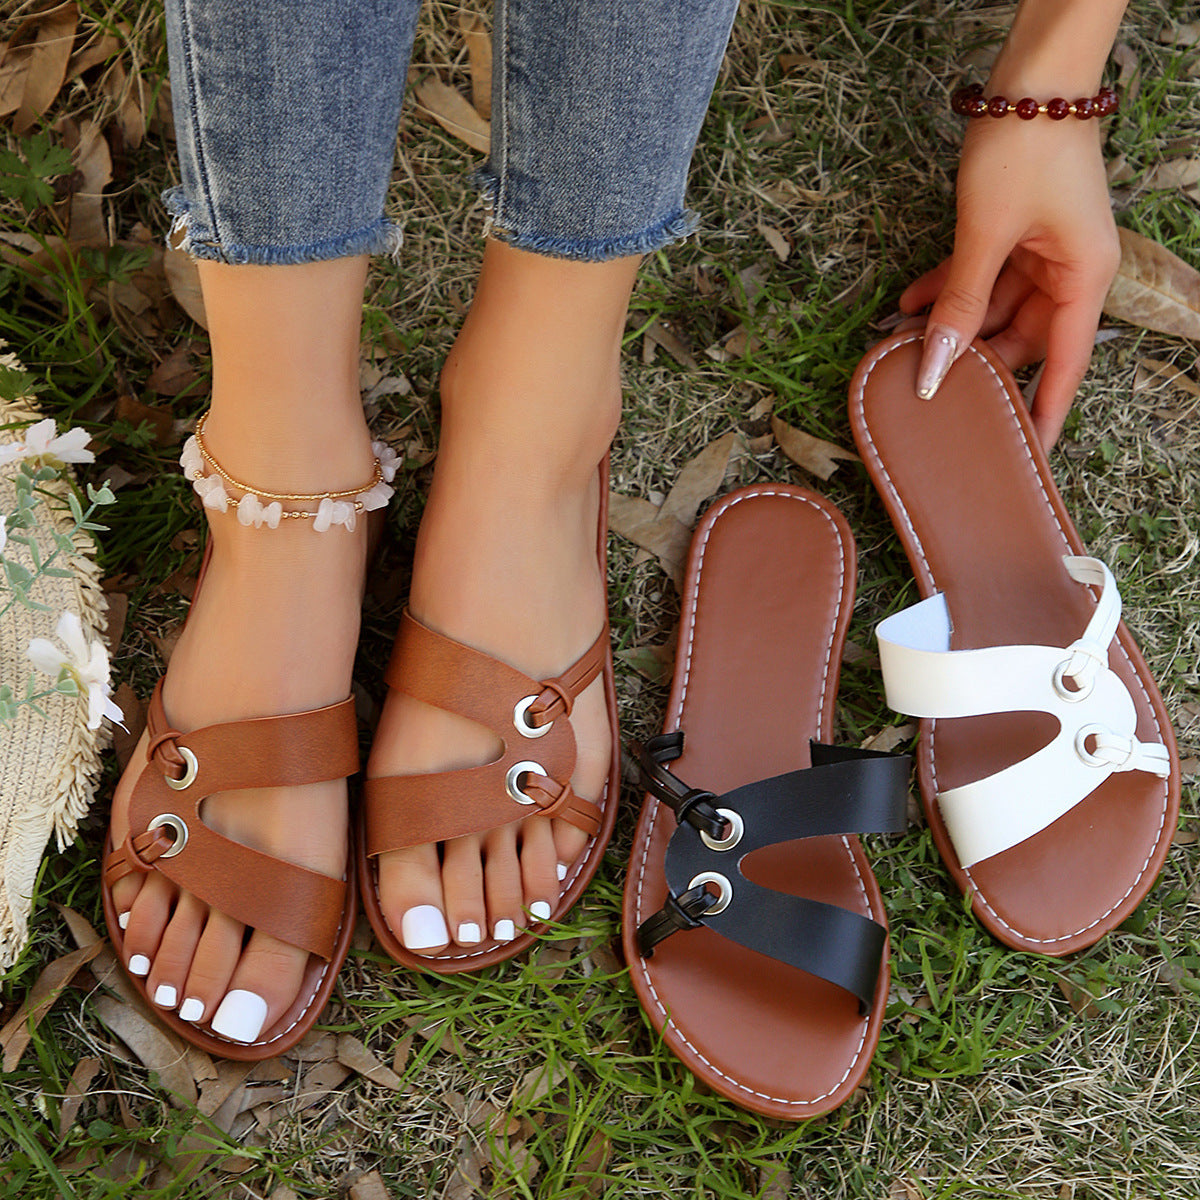 Round Toe Flat Sandals Summer Fashion Casual Non-slip Slides Shoes For Women Shoes & Bags